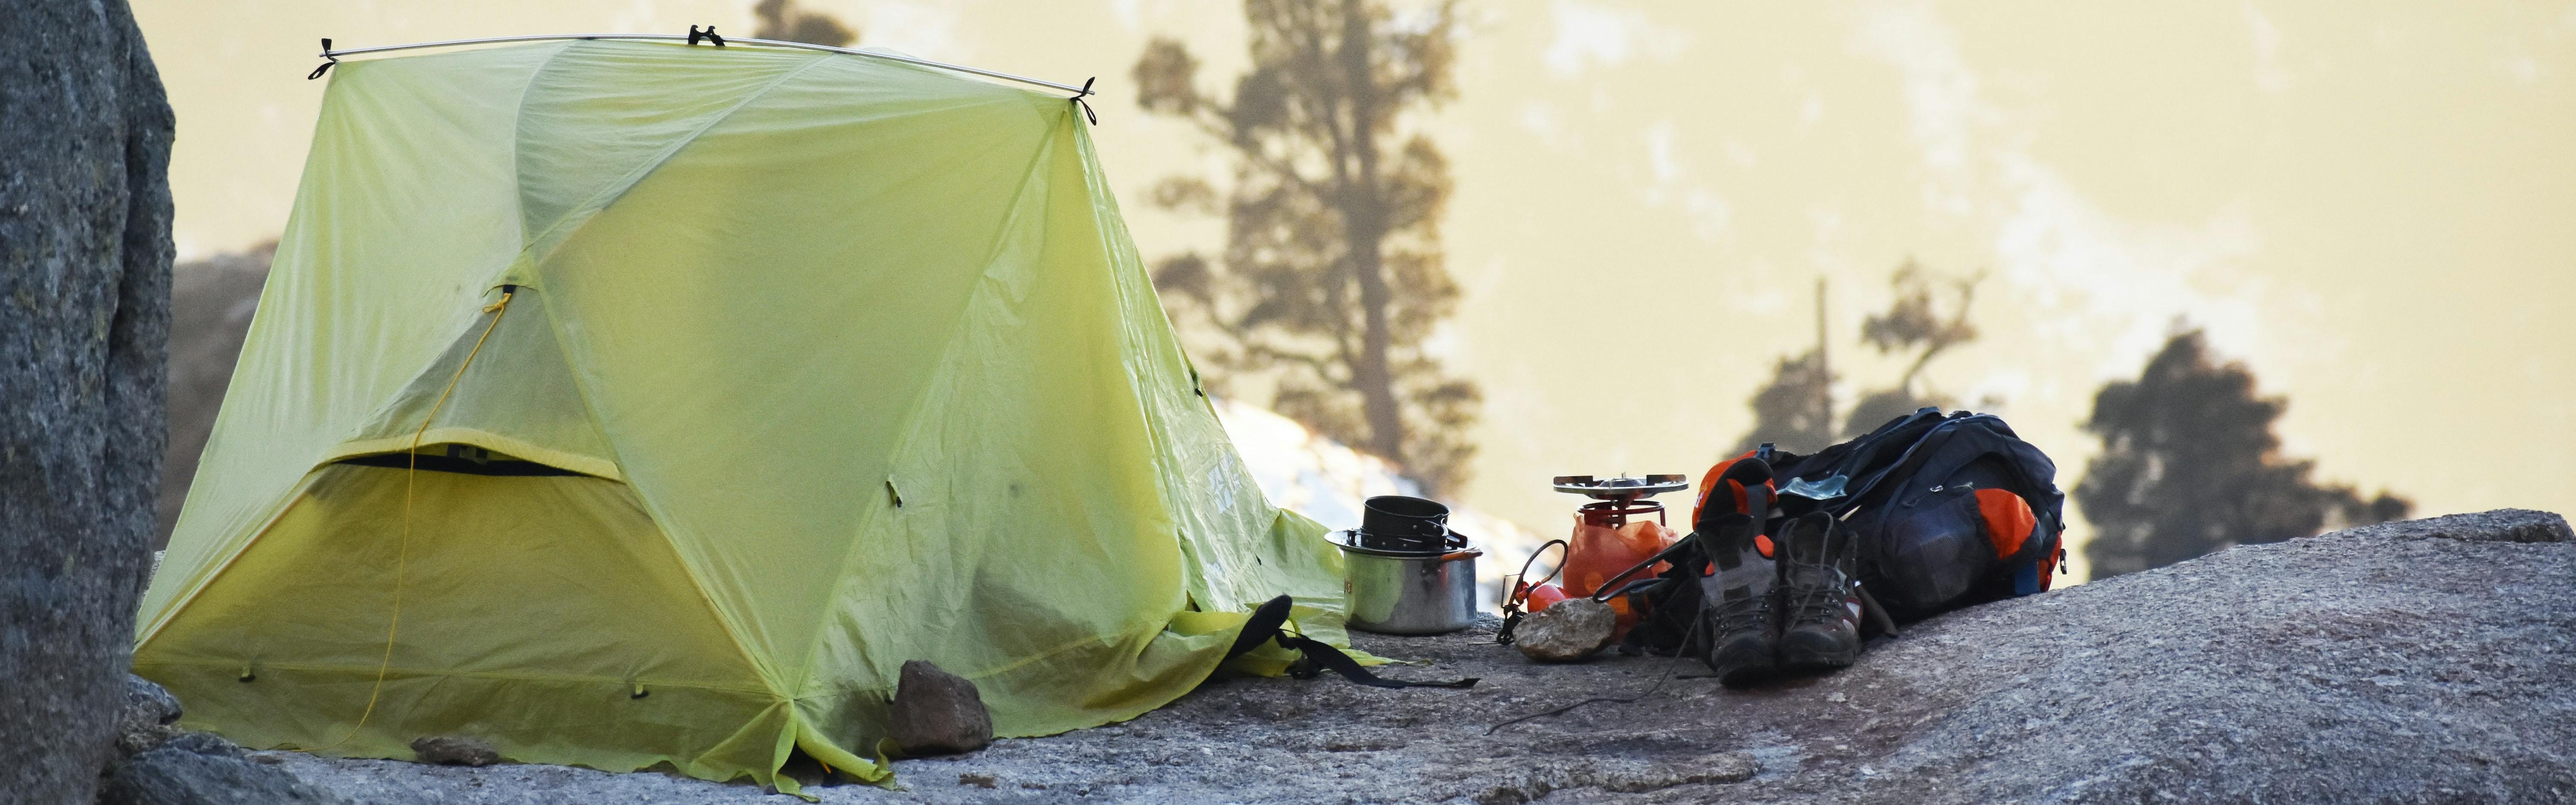 A tent is set up with cooking equipment next to it on a rock base. Snow is visible in the background.